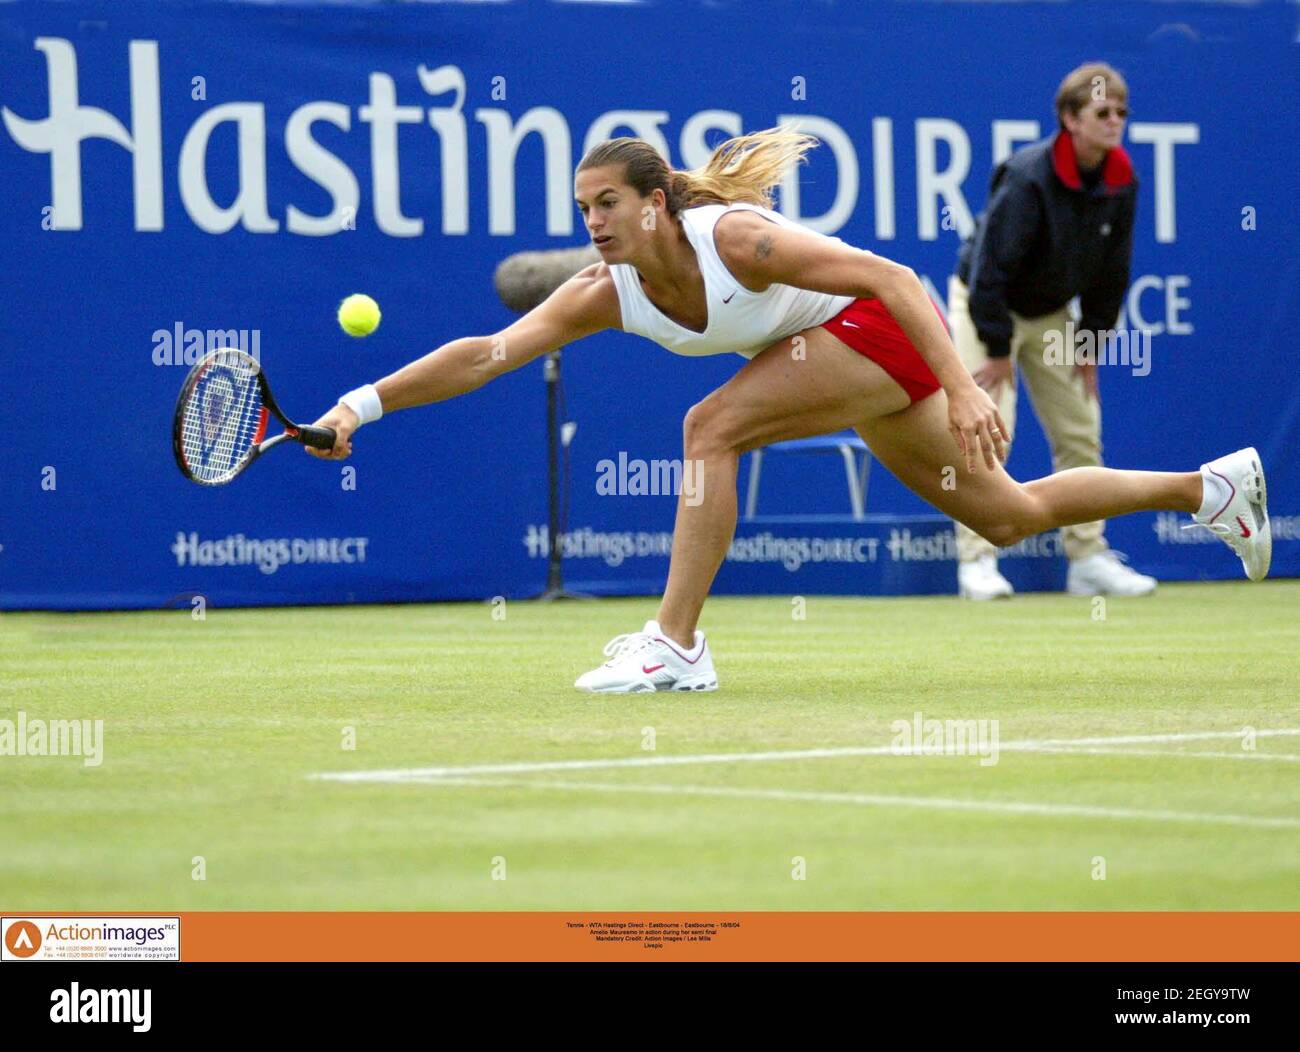 Tennis - WTA Hastings Direct - Eastbourne - Eastbourne - 18/6/04 Amelie  Mauresmo in action during her semi final Mandatory Credit: Action Images /  Lee Mills Livepic Stock Photo - Alamy